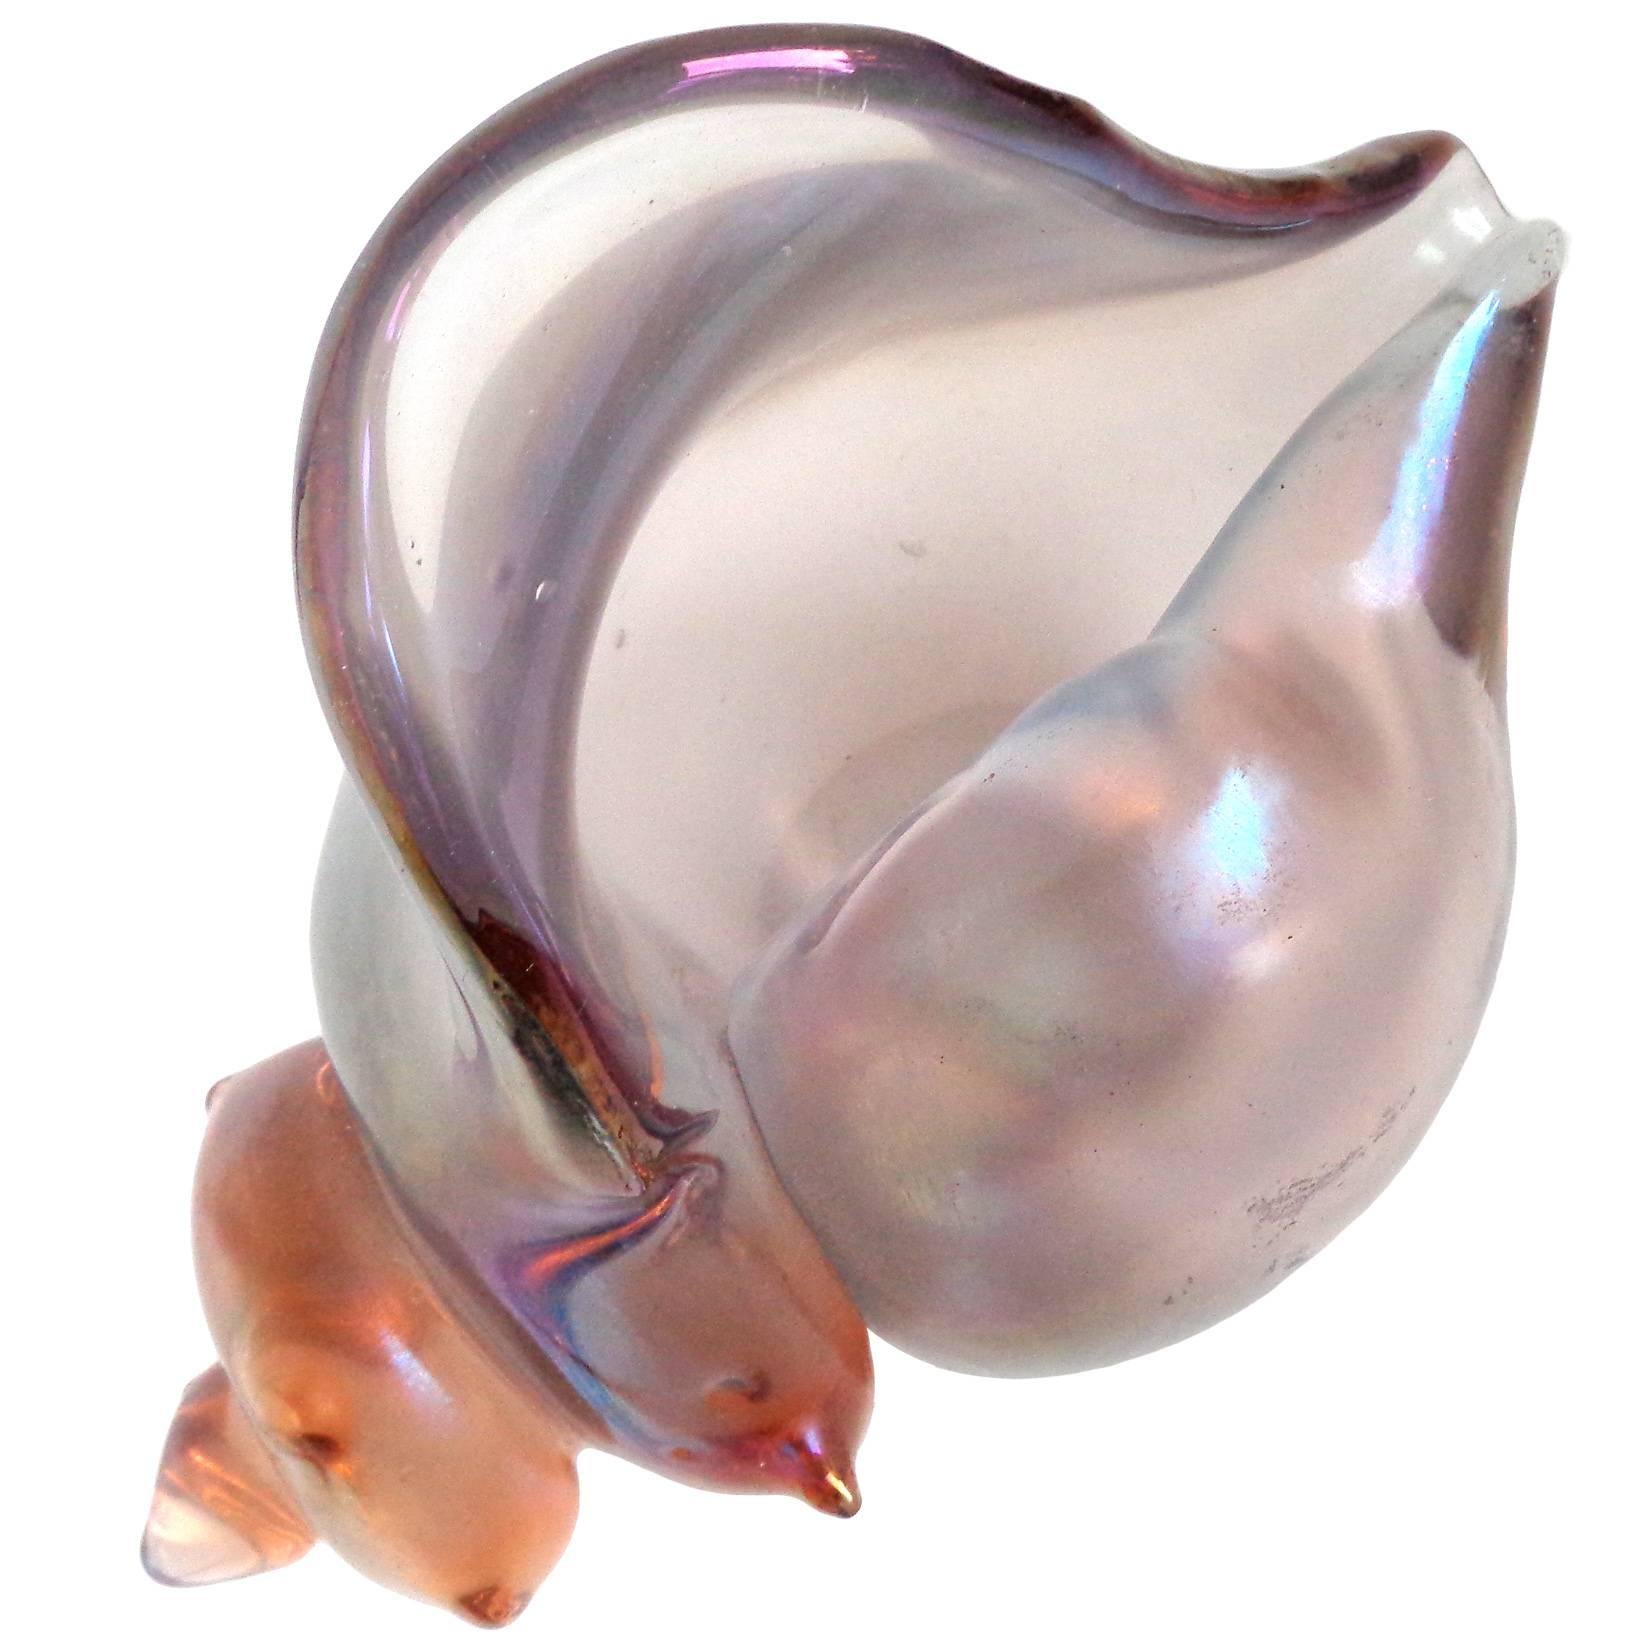 Free shipping worldwide! See details below description.

Very rare Murano handblown peach to silver color iridescent art glass conch shell sculpture. Documented to the Seguso Vetri d'Arte company, model # 17503. A collectors item!

Please look